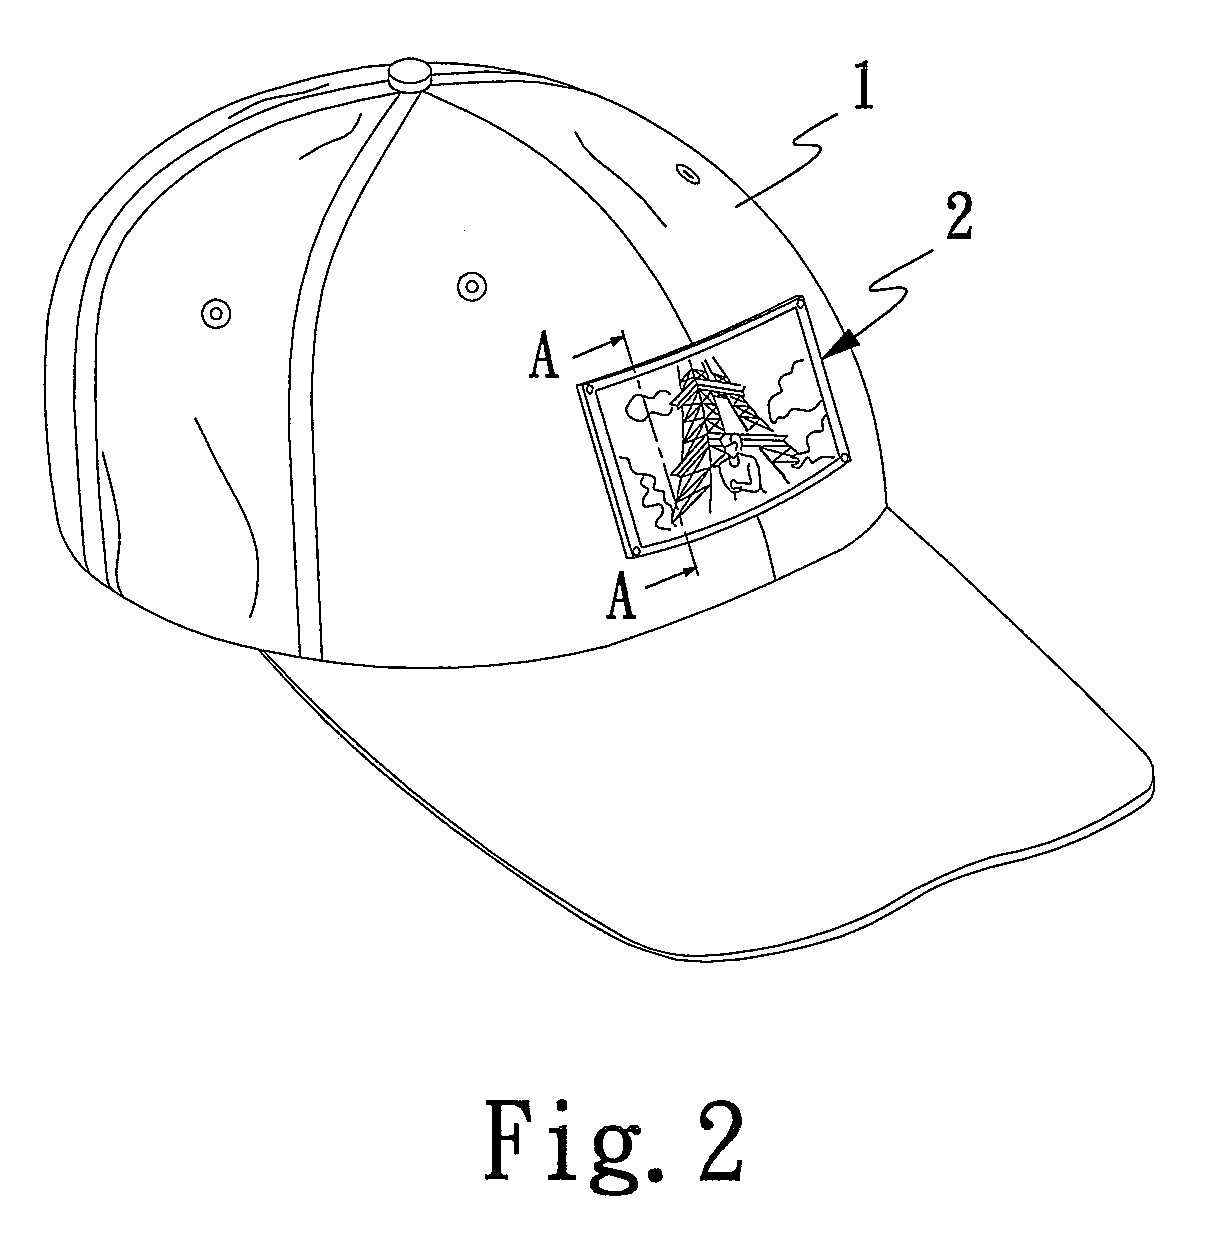 Badge structure of a portable item